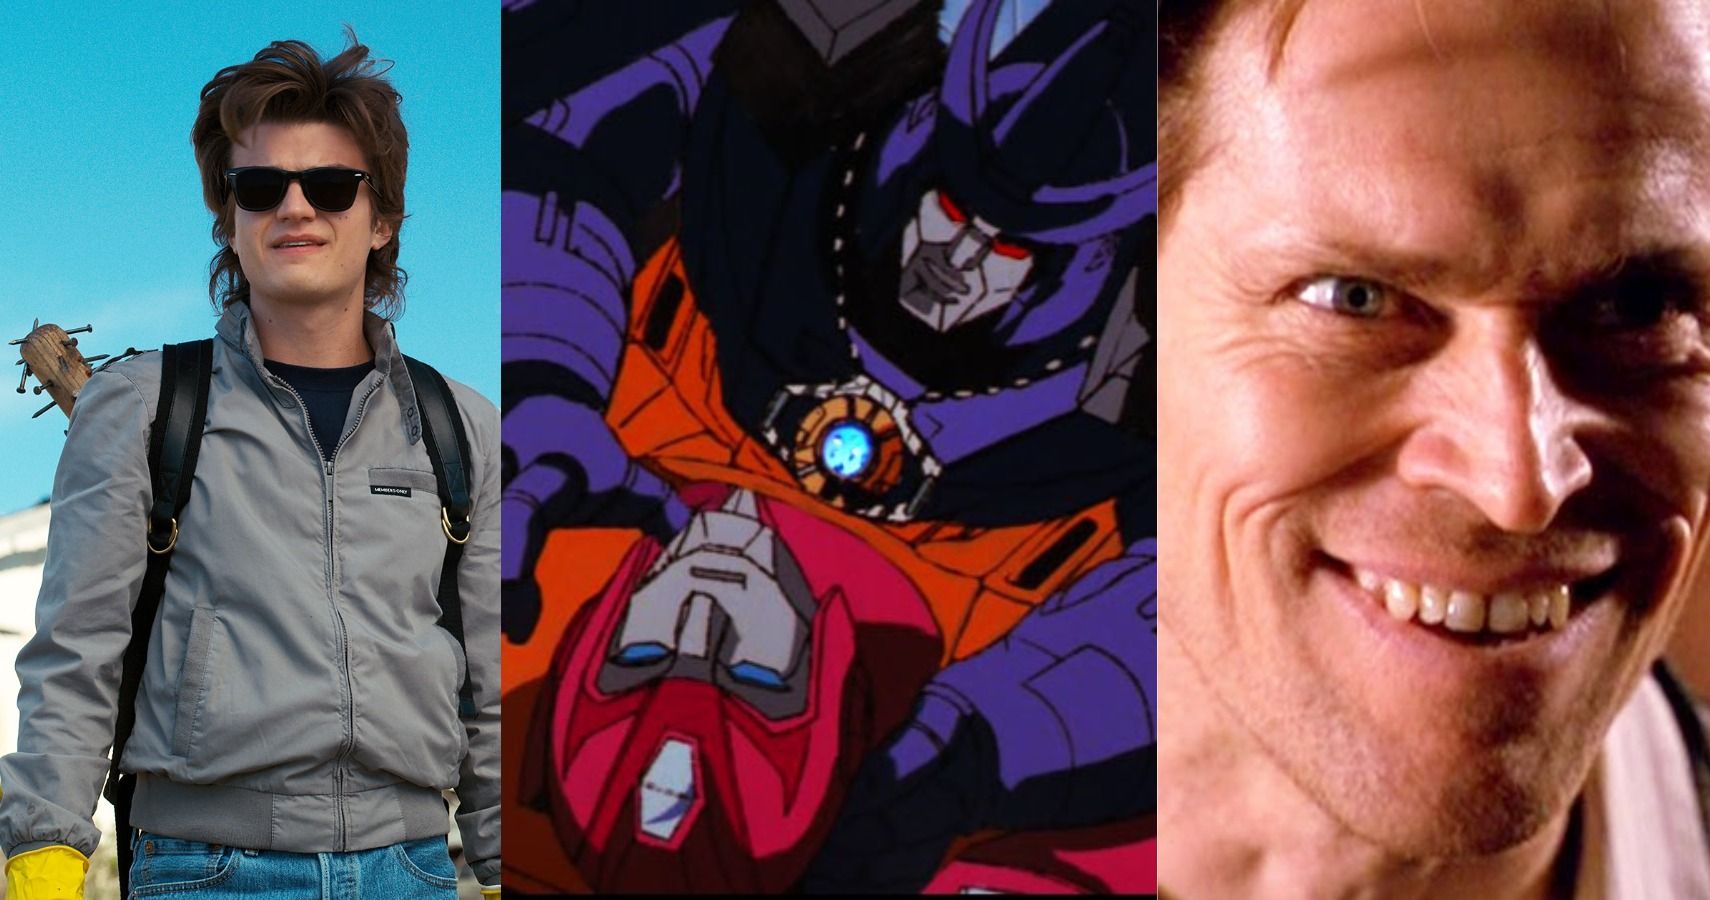 A combined image featuring an image of Hot Rod fighting Galvatronin The Transformers: The Movie, with an image of Willem Dafoe on the right and an image of Joe Keery on the left.